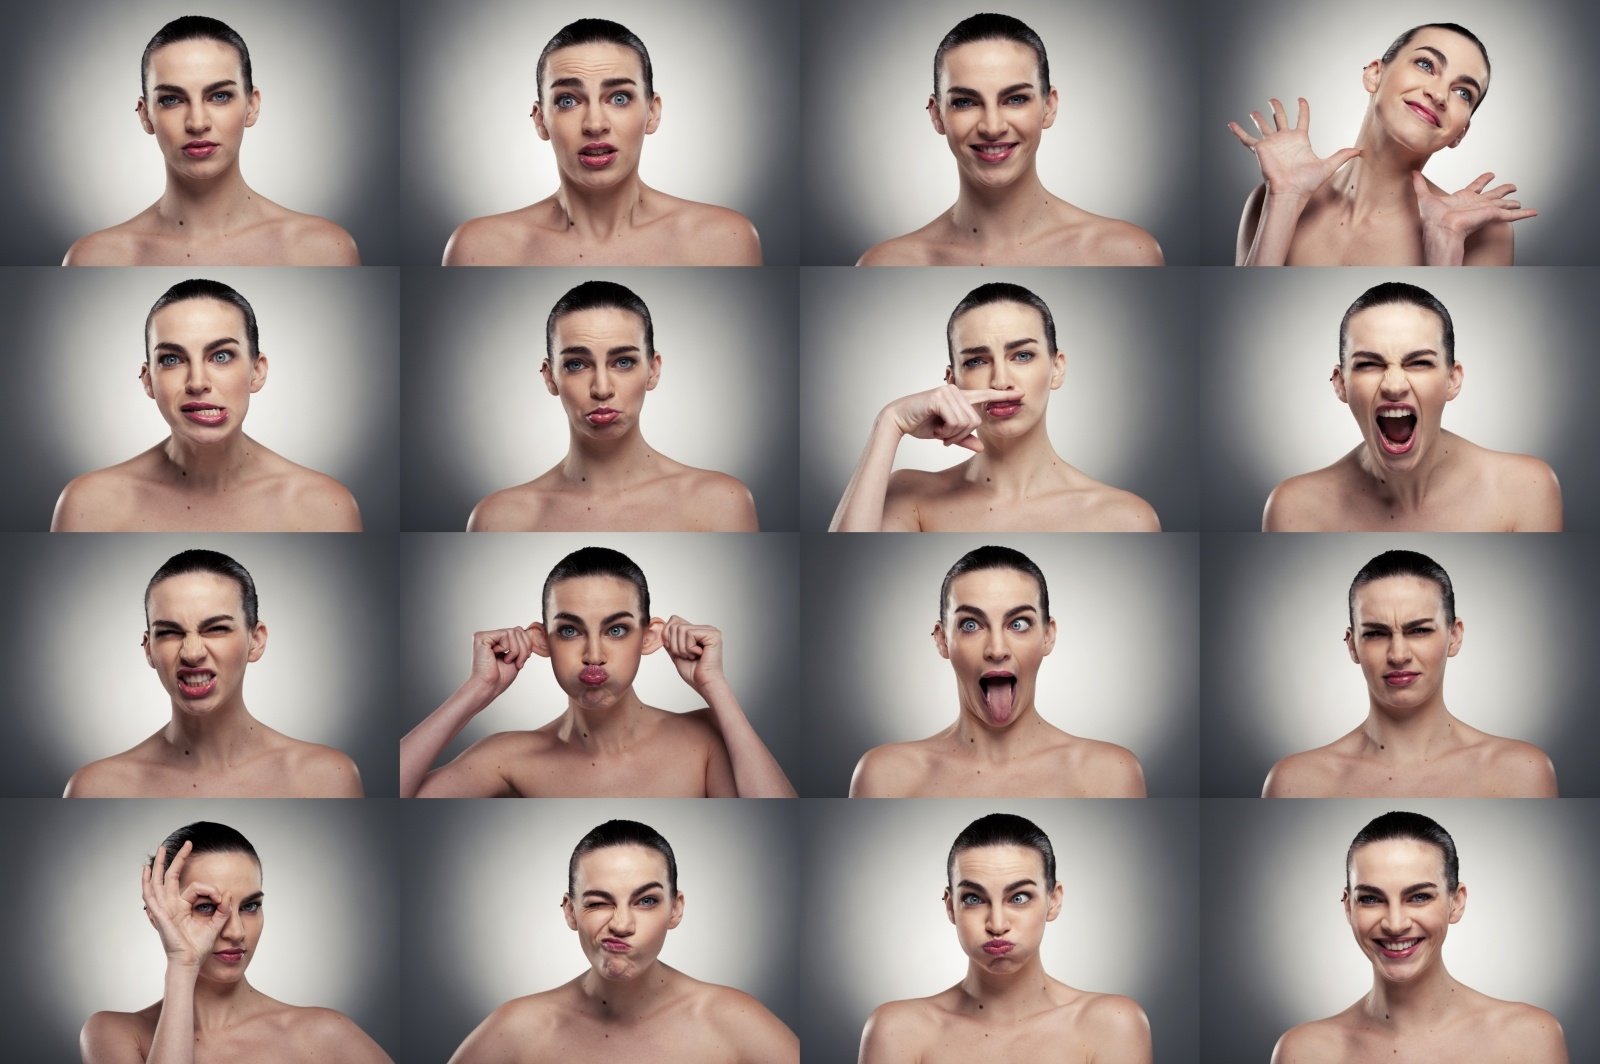 Synthesizing realistic facial expressions from